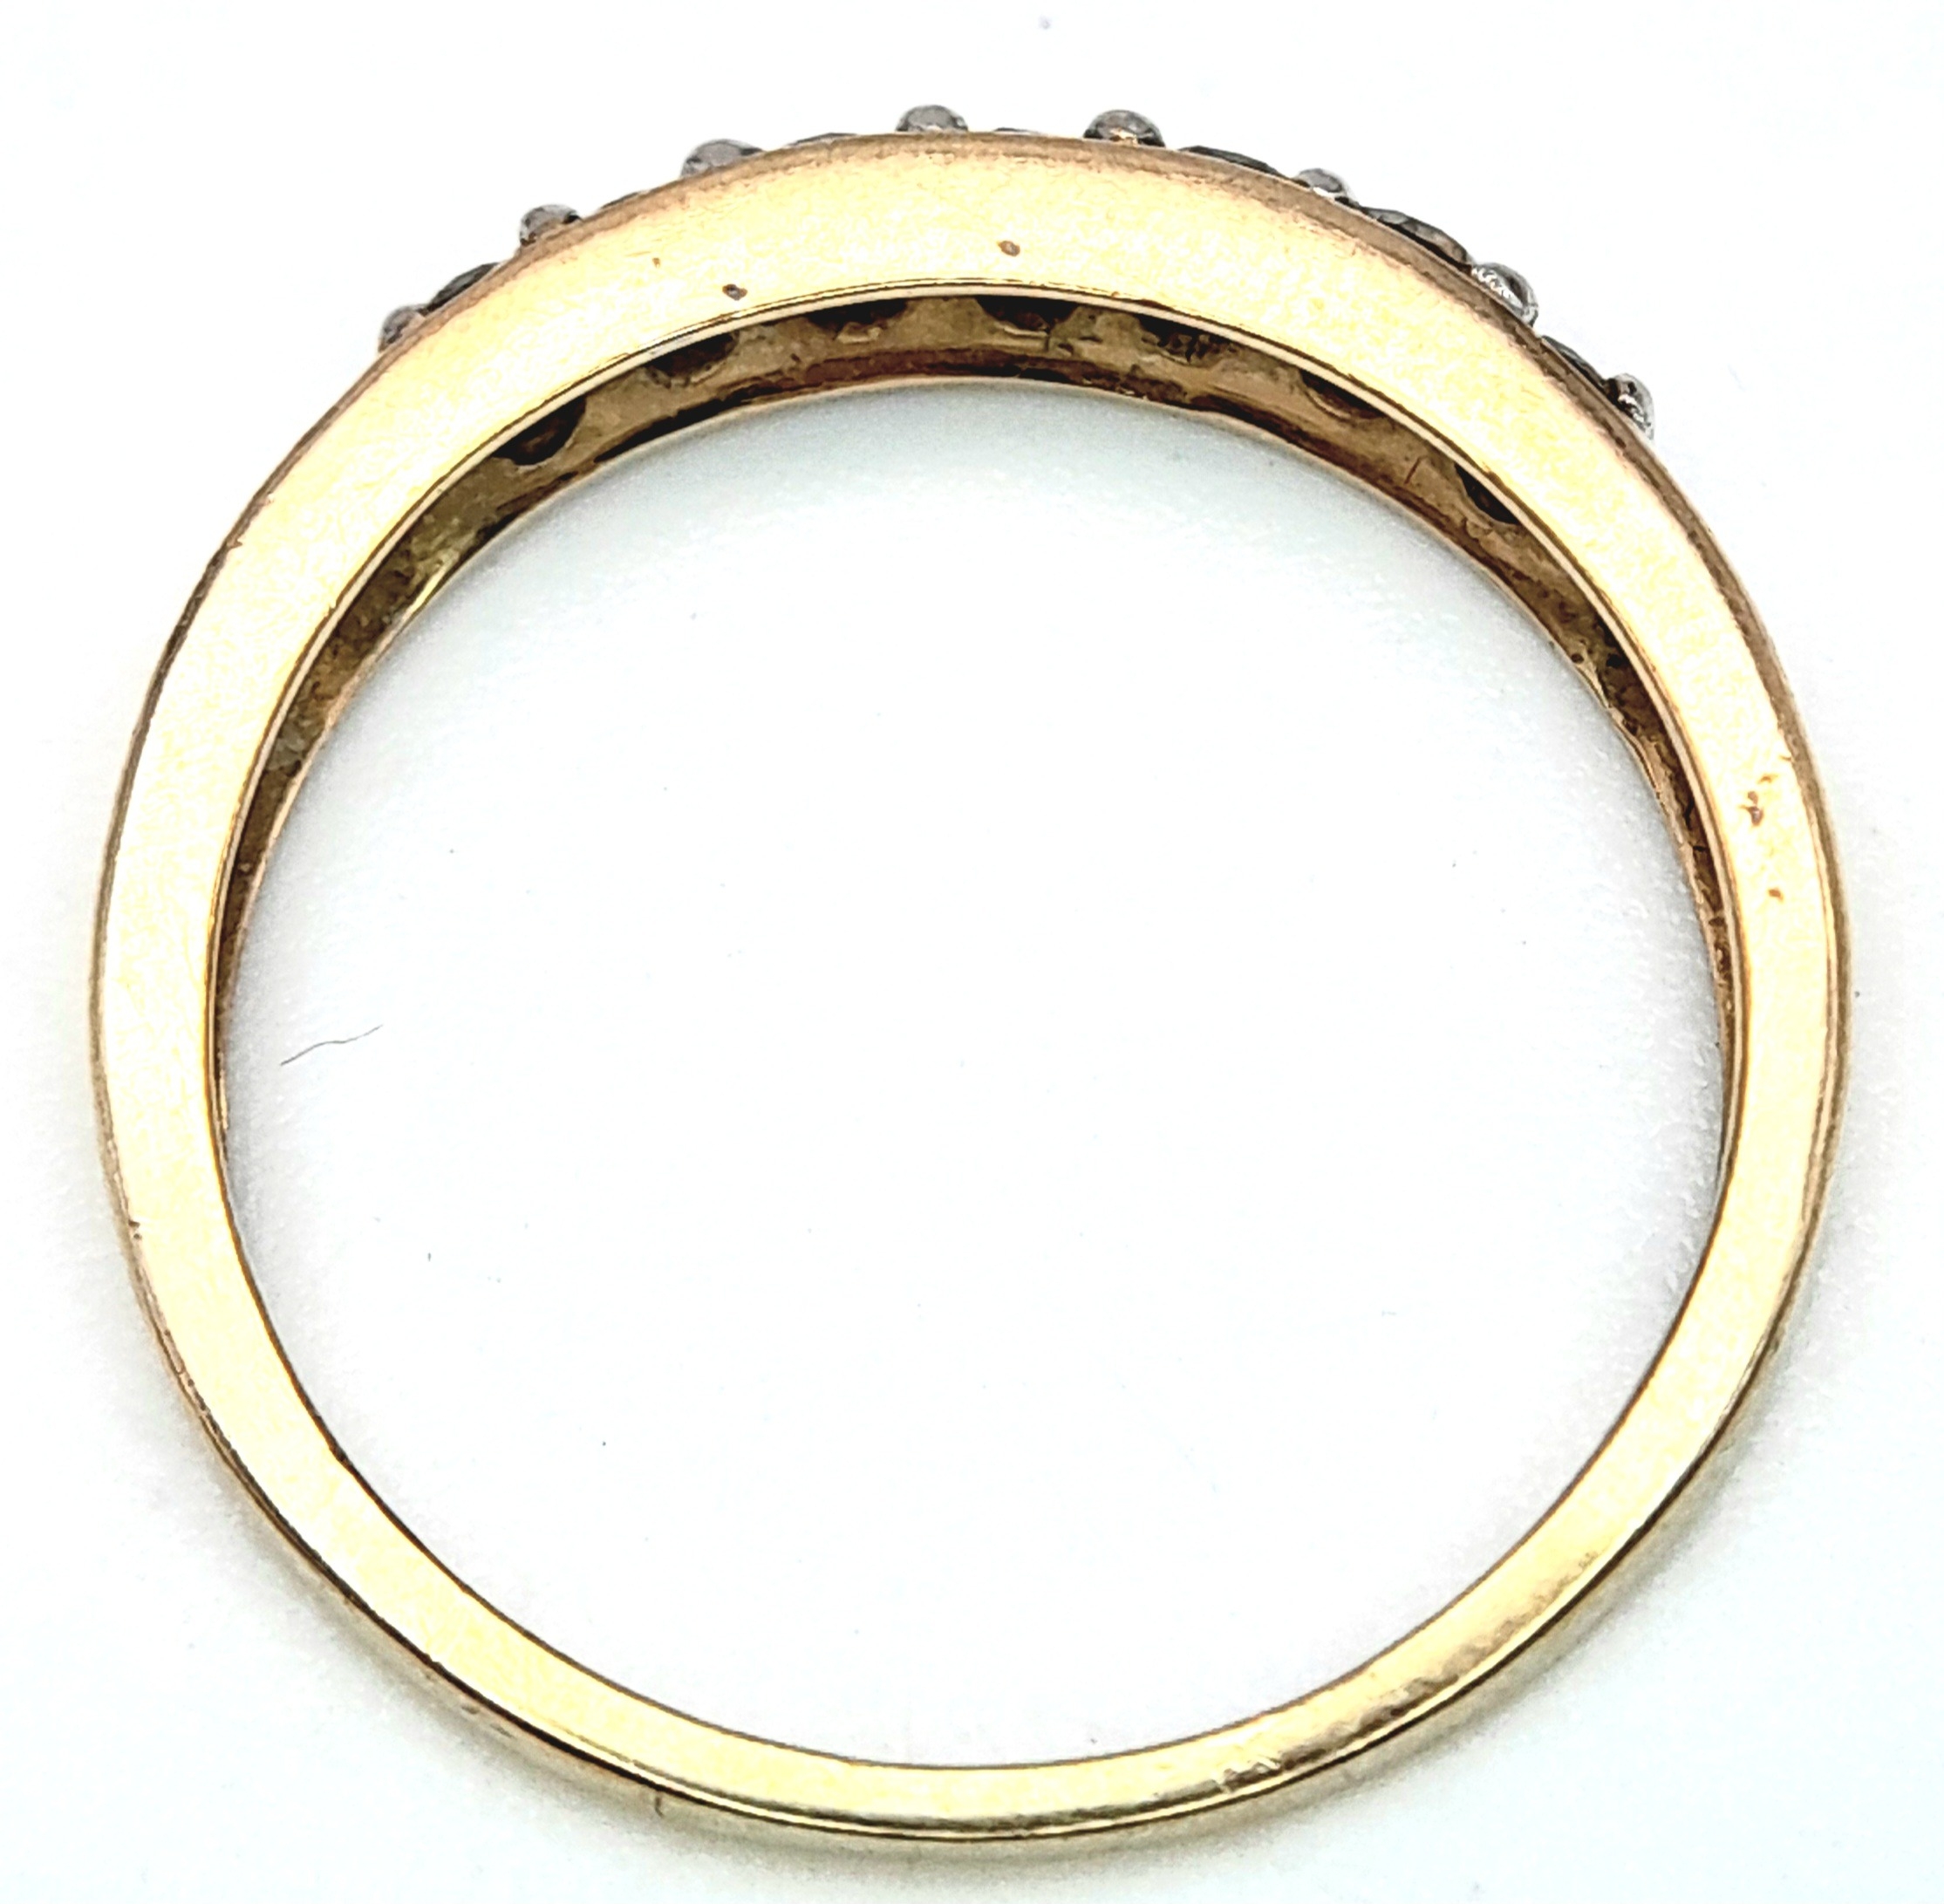 A 9K YELLOW GOLD DIAMOND SET BAND RING. 0.25ctw, Size N, 1.8g total weight. Ref: SC 8007 - Image 5 of 6